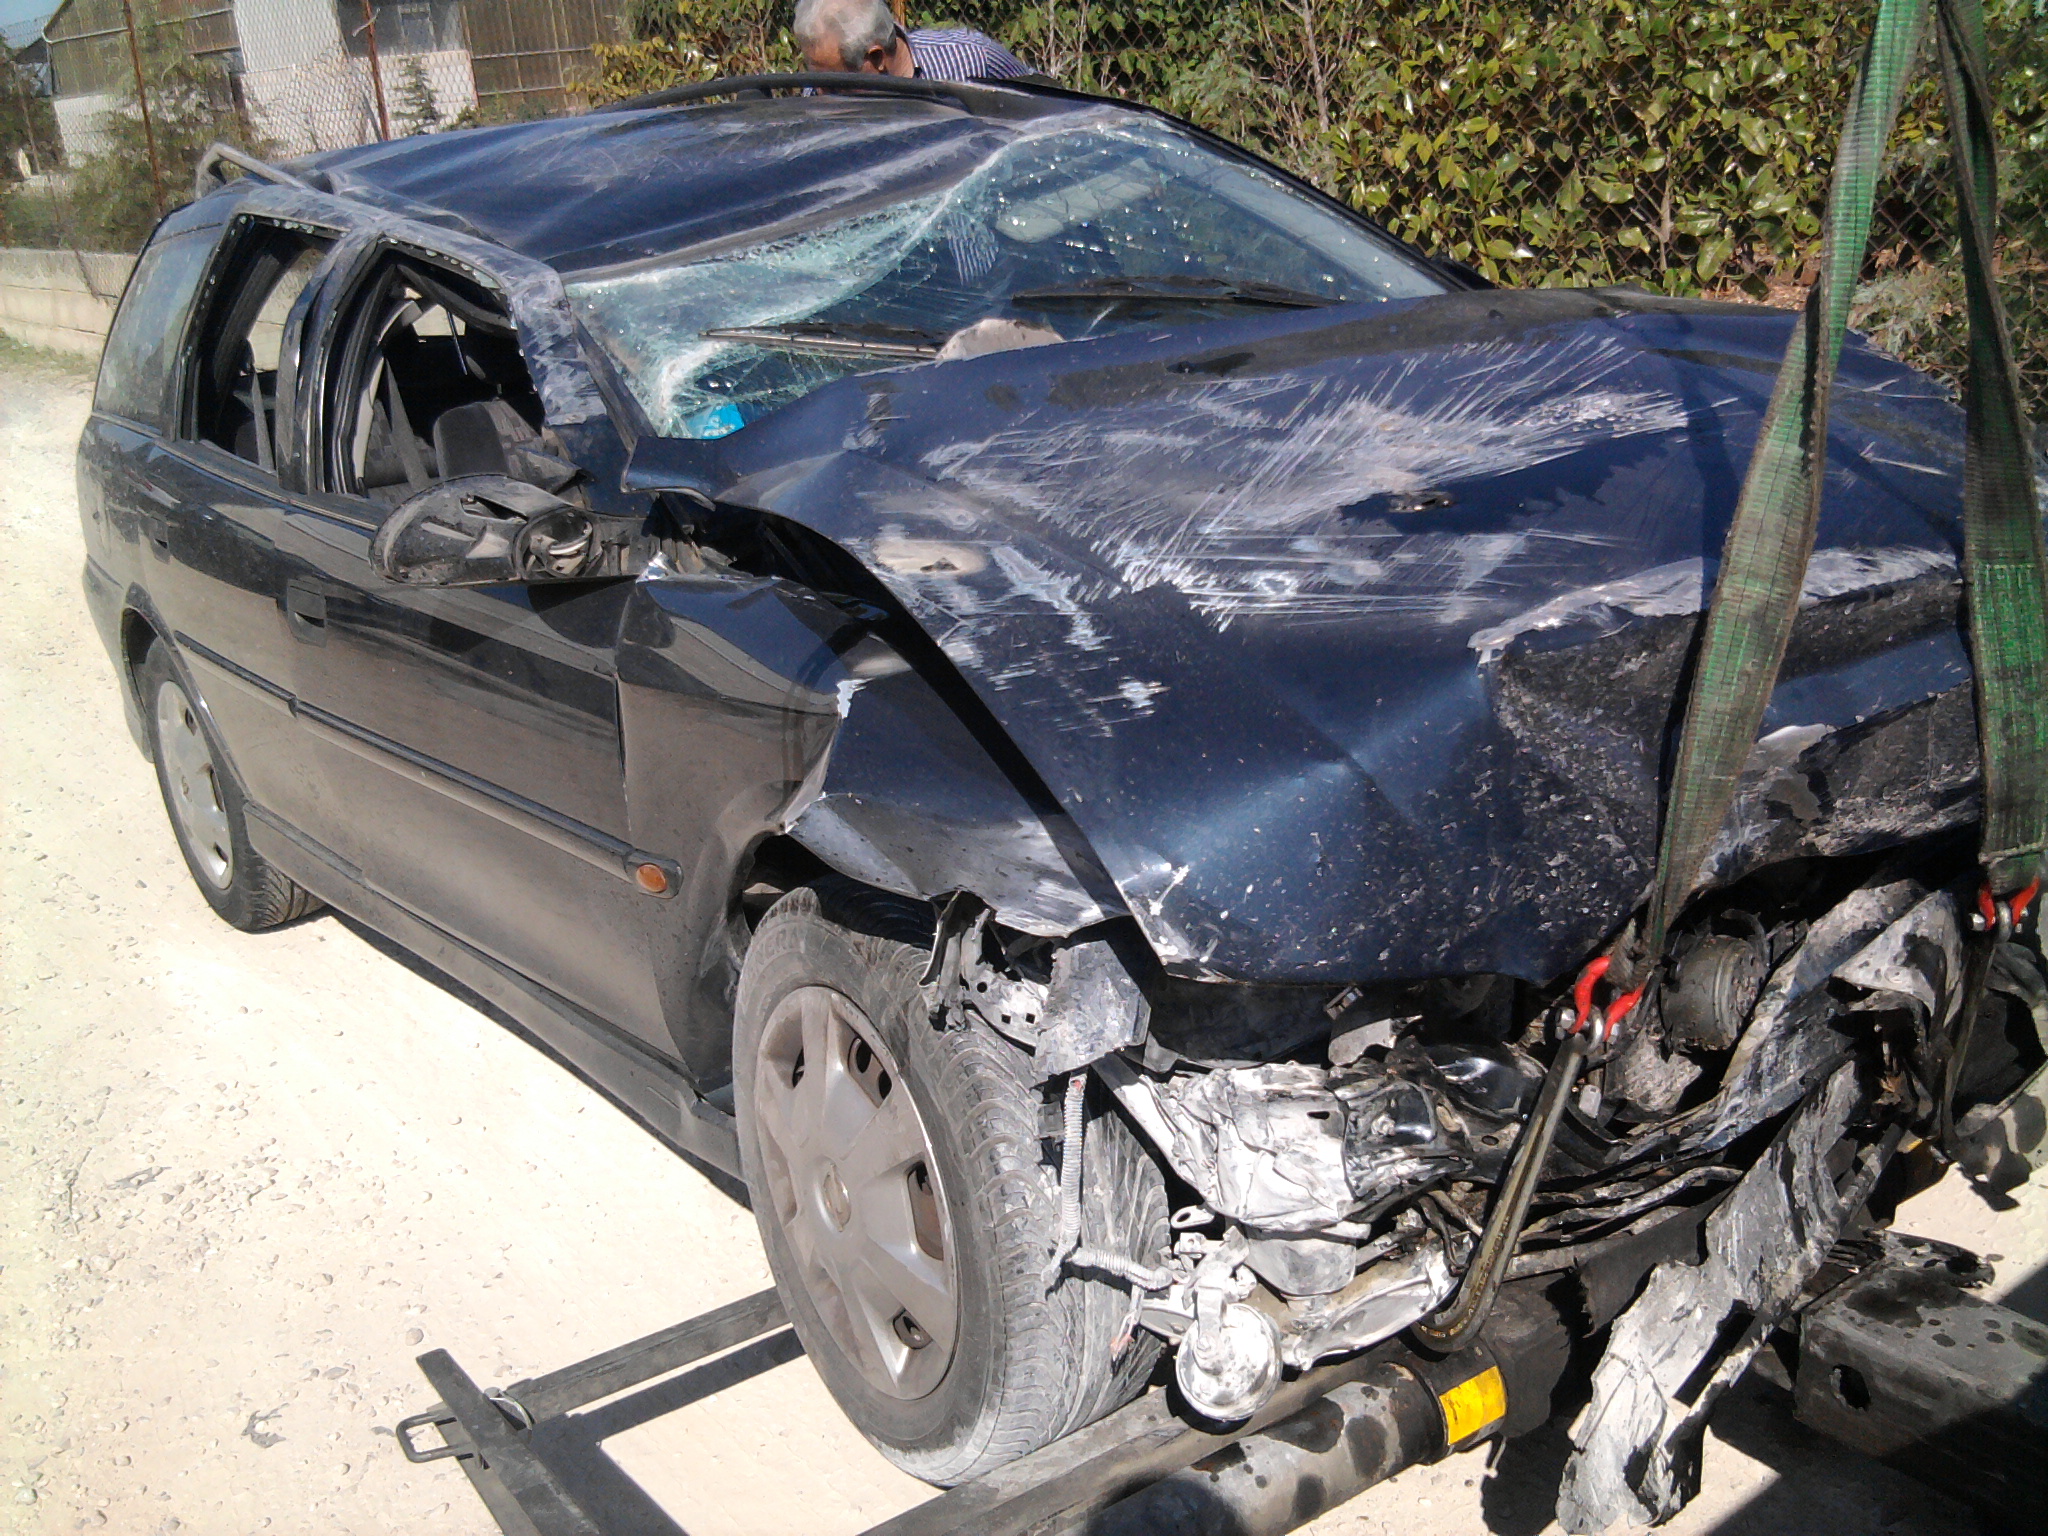 A car with heavy accident damage